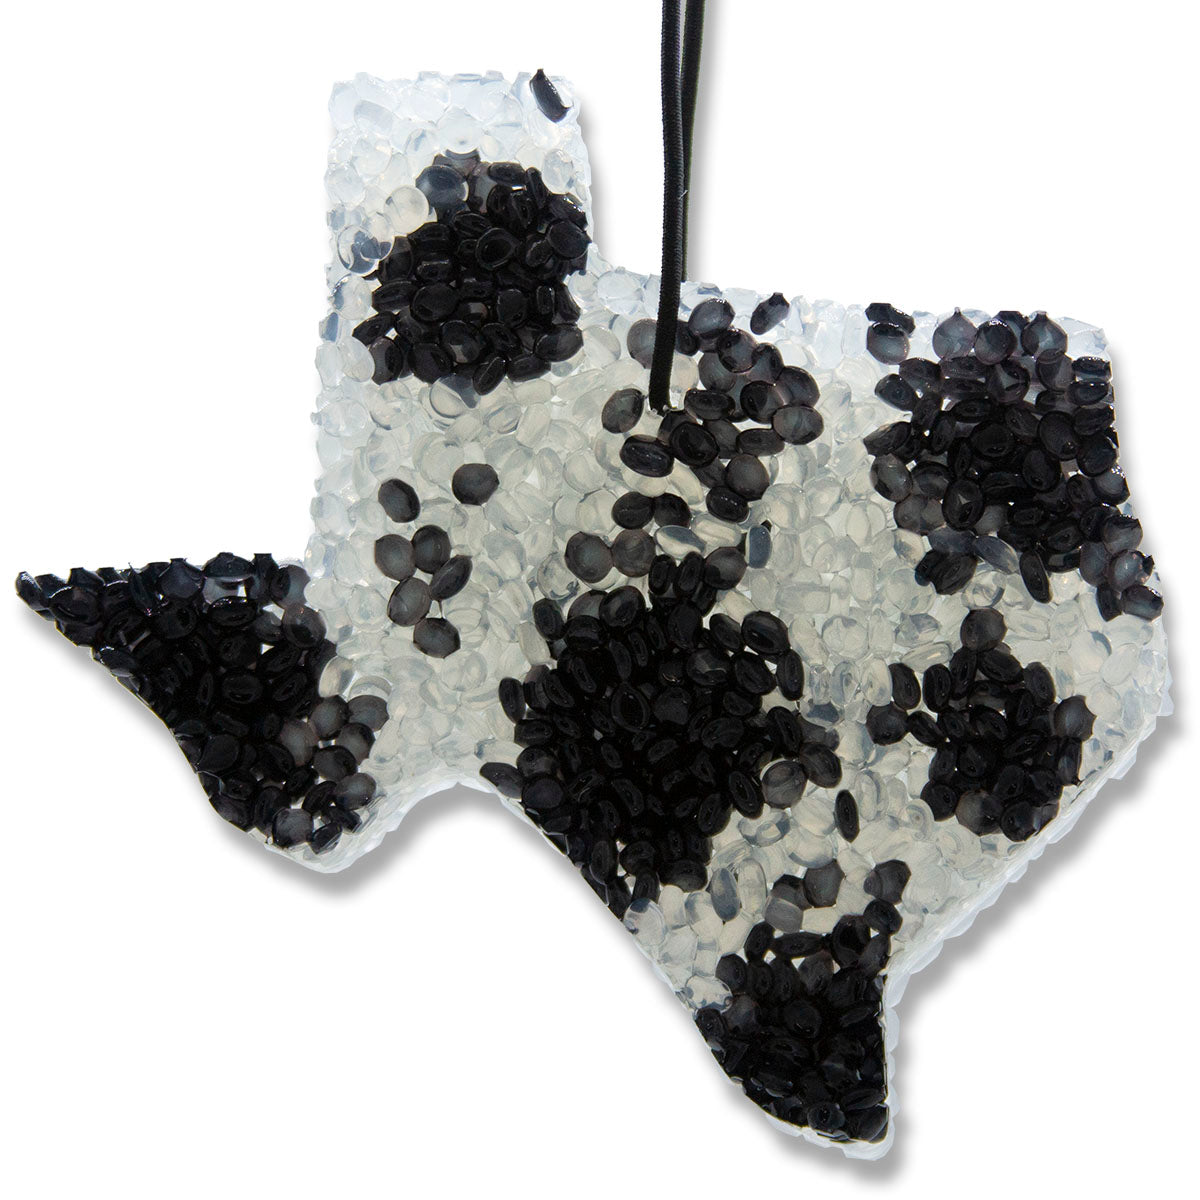 Pina Colada, Lone Star Candles & More's Premium Strongly Scented Freshies, A Delicious Blend of Sweet Coconut and Pineapple Juice, Car & Air Freshener, USA Made in Texas, Black TX Cowhide 1-Pack